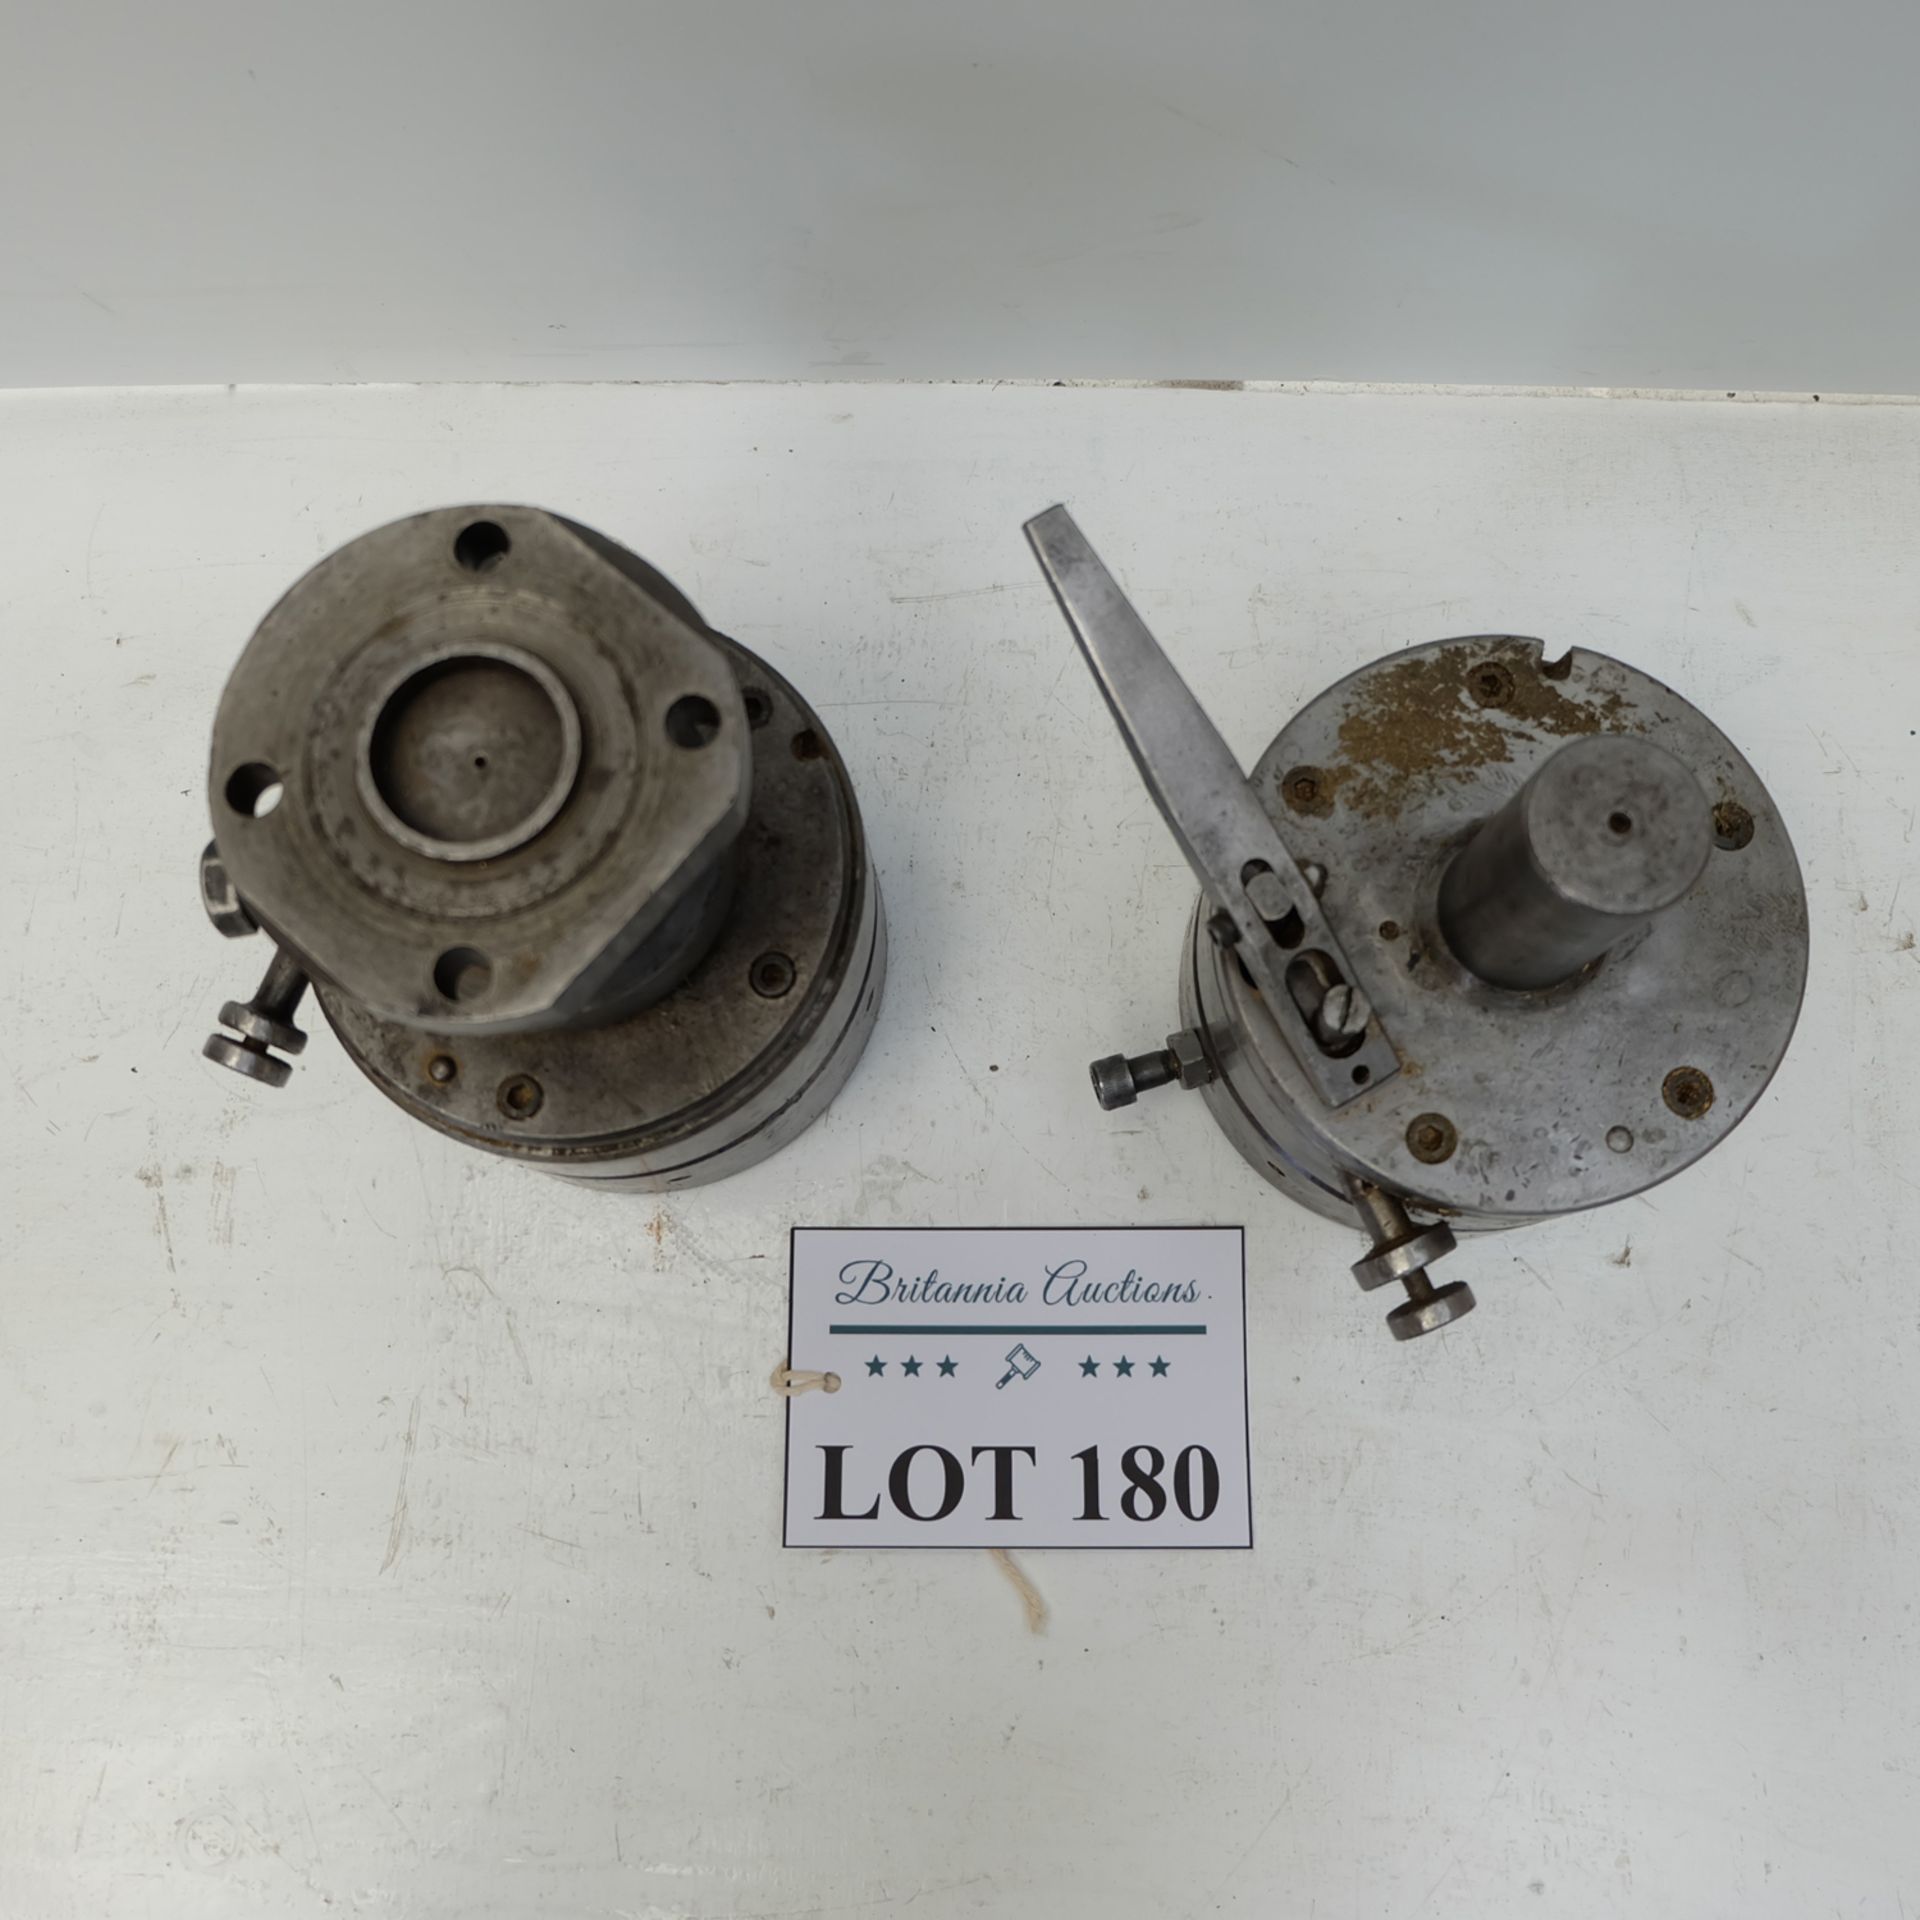 2 x Coventry Die Heads 2 1/2" Capacity 1 1/2" Spiggots. - Image 4 of 4